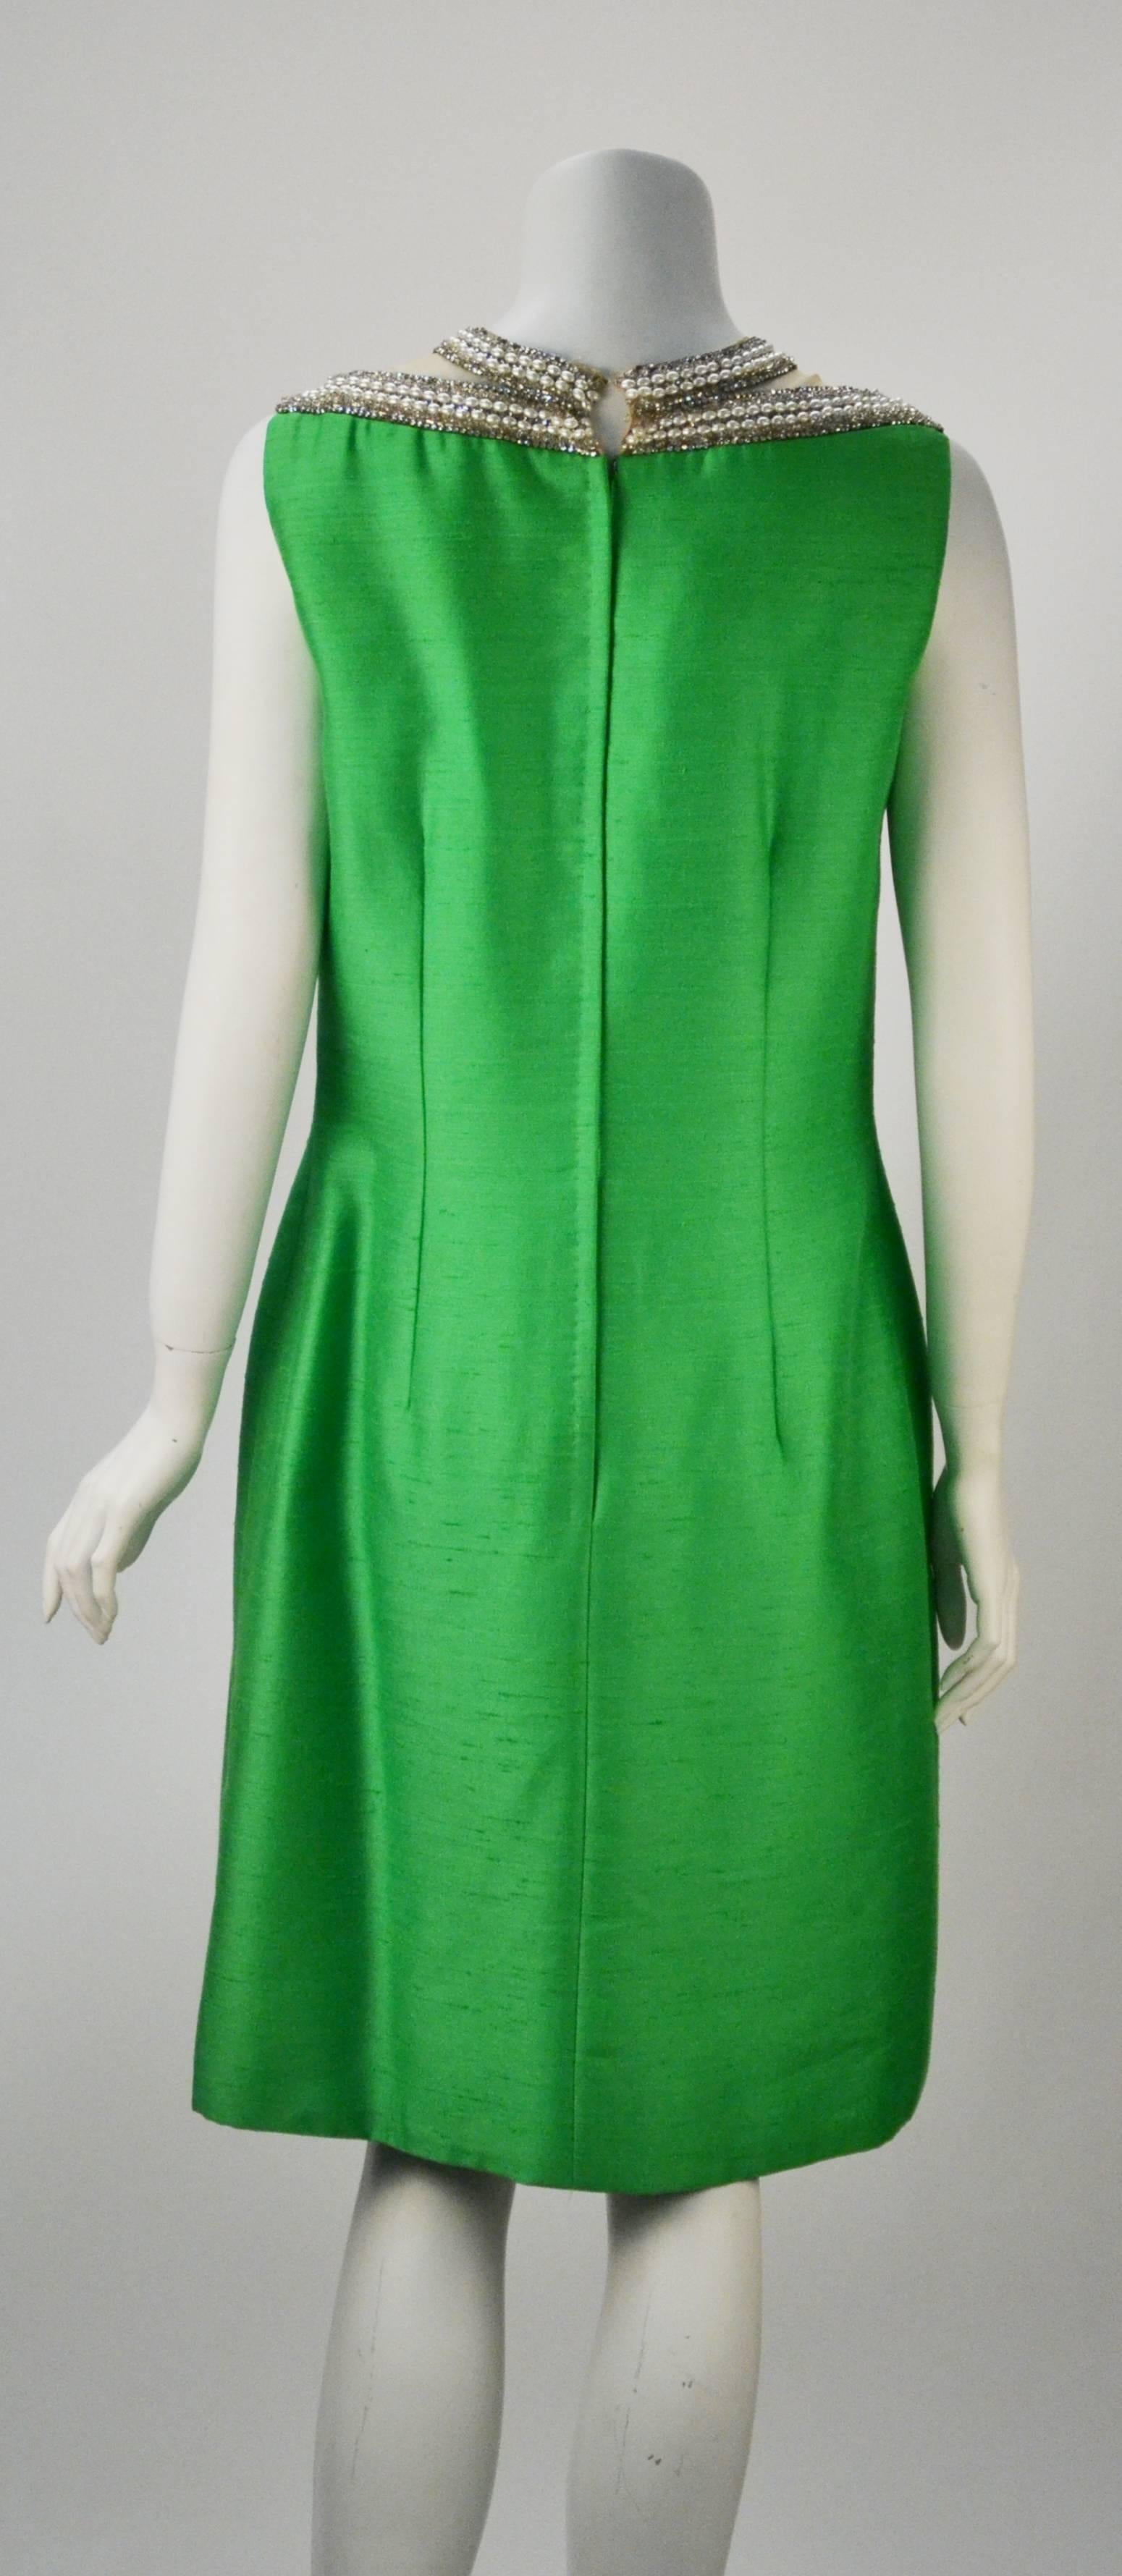 1960s Mr. Blackwell Custom Green Silk 2 Piece Dress and Jacket Ensemble For Sale 1